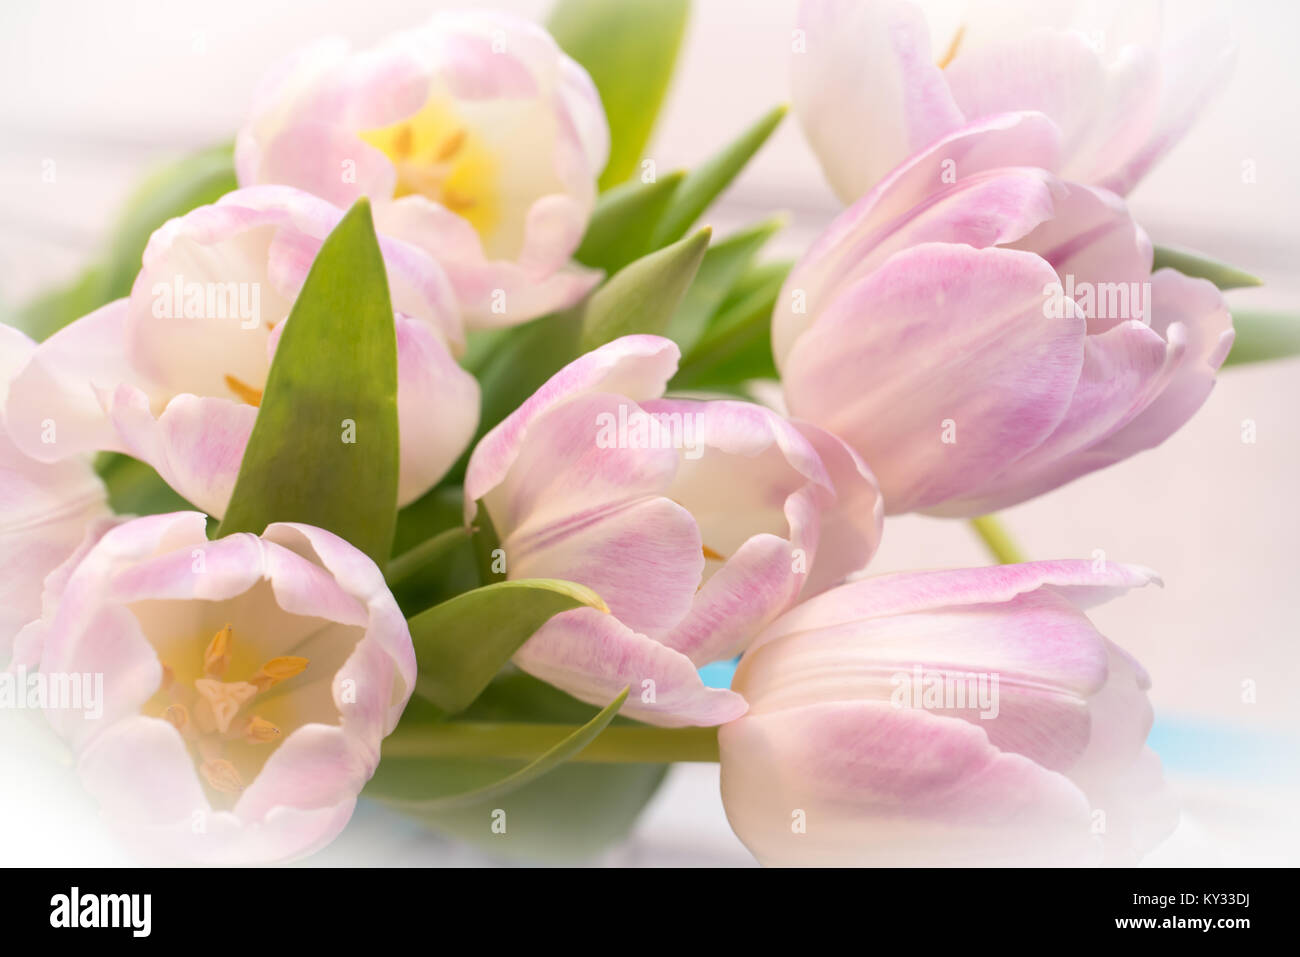 Bunch of pastel pink tulips close up Stock Photo